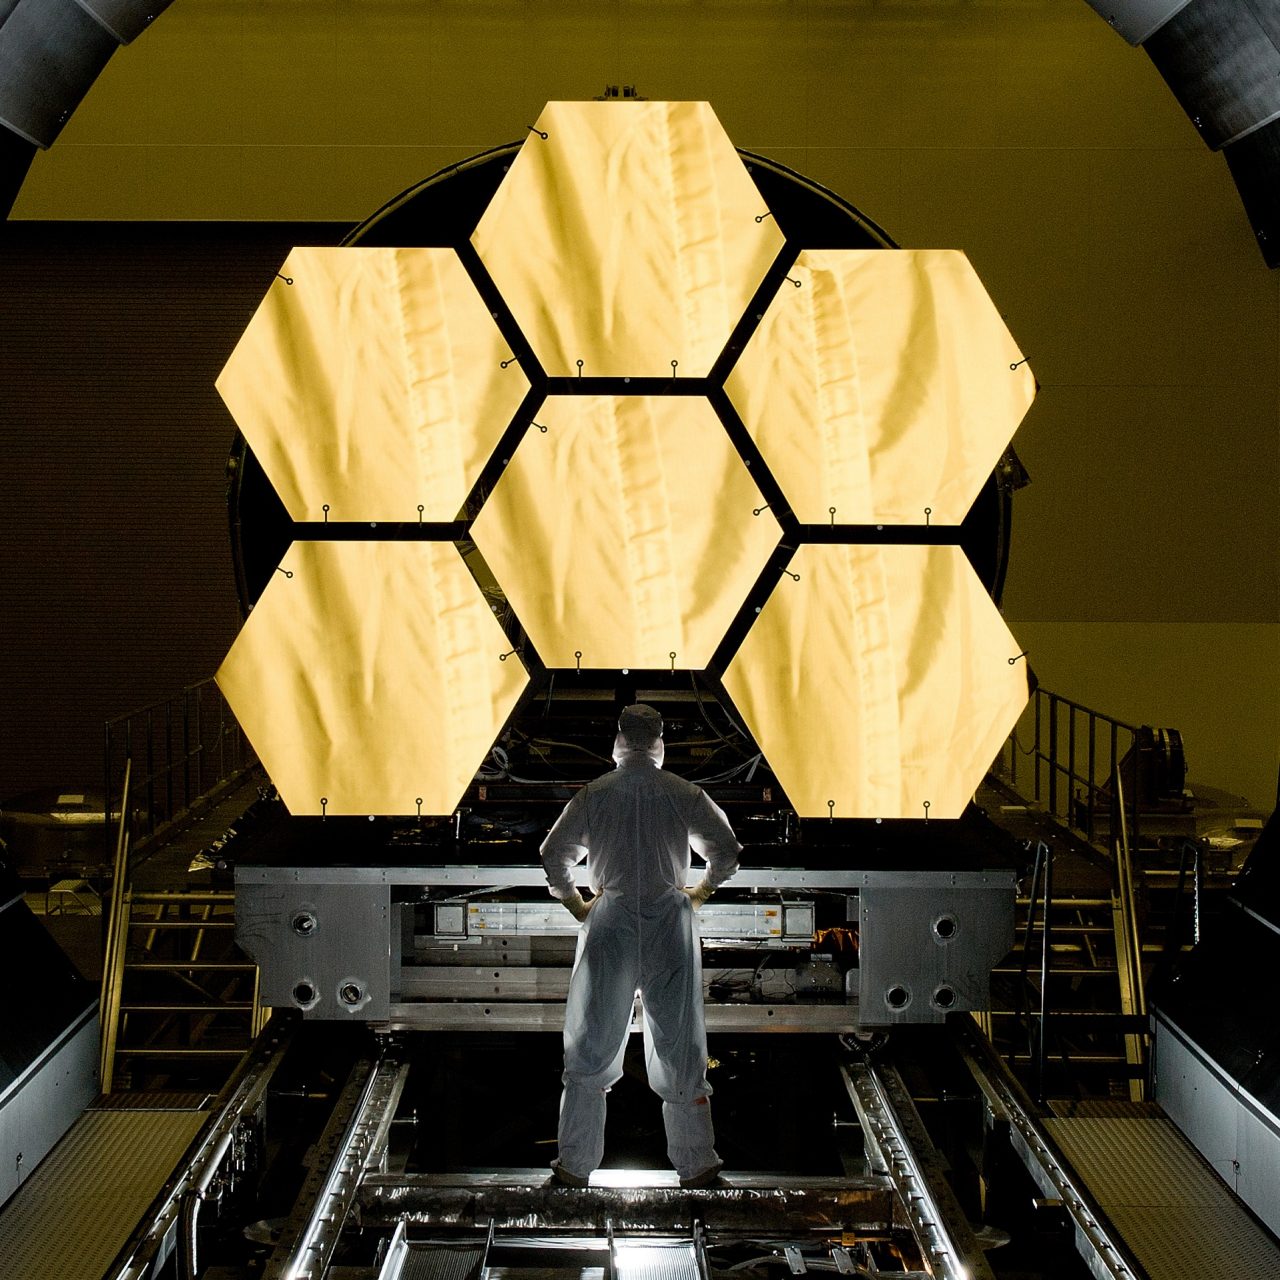 An engineer stands with their back to the camera looking at the James Webb Telescope.